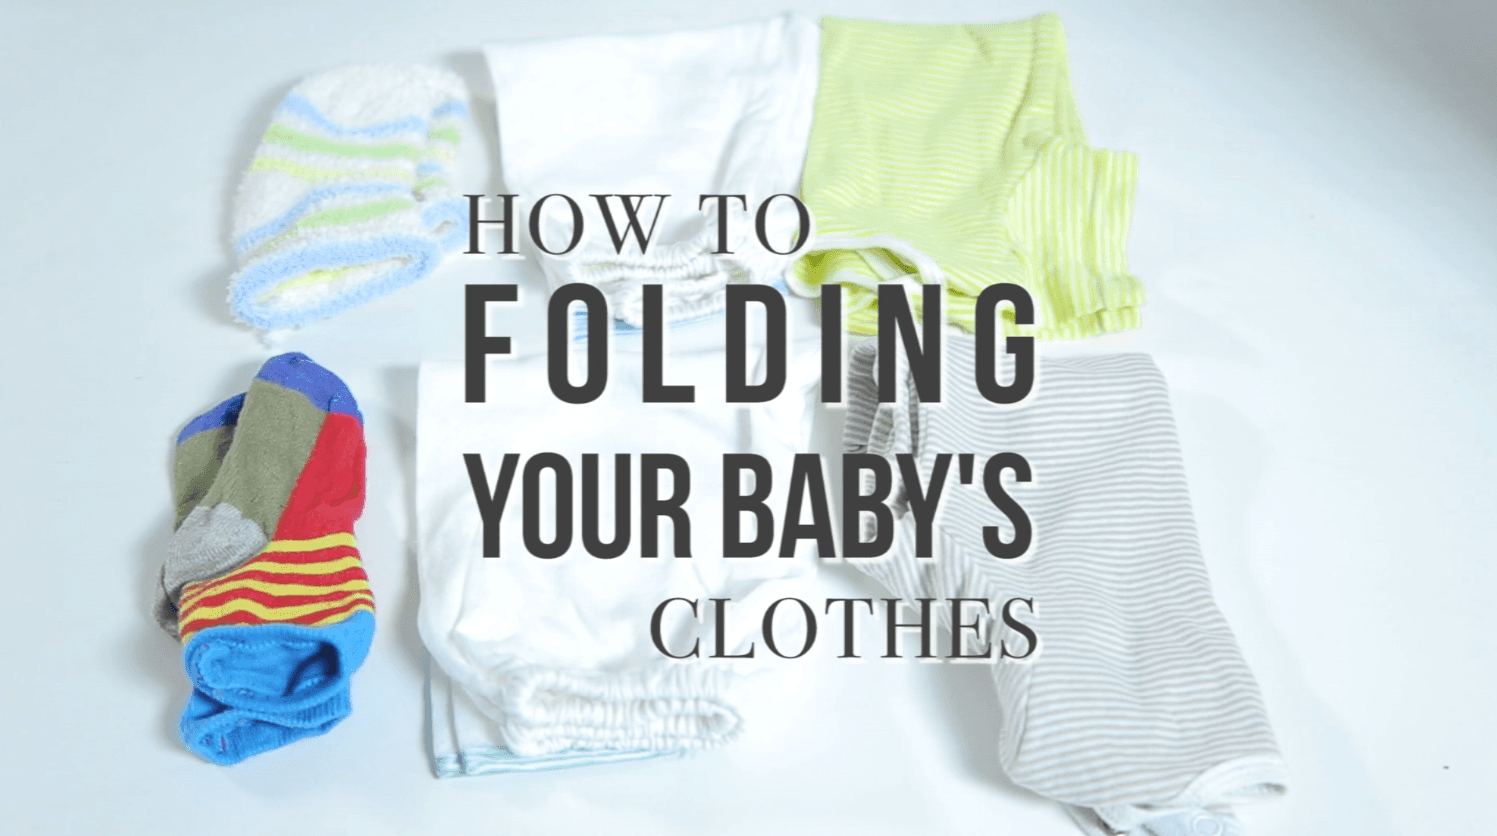 How To Folding Your Baby's Clothes